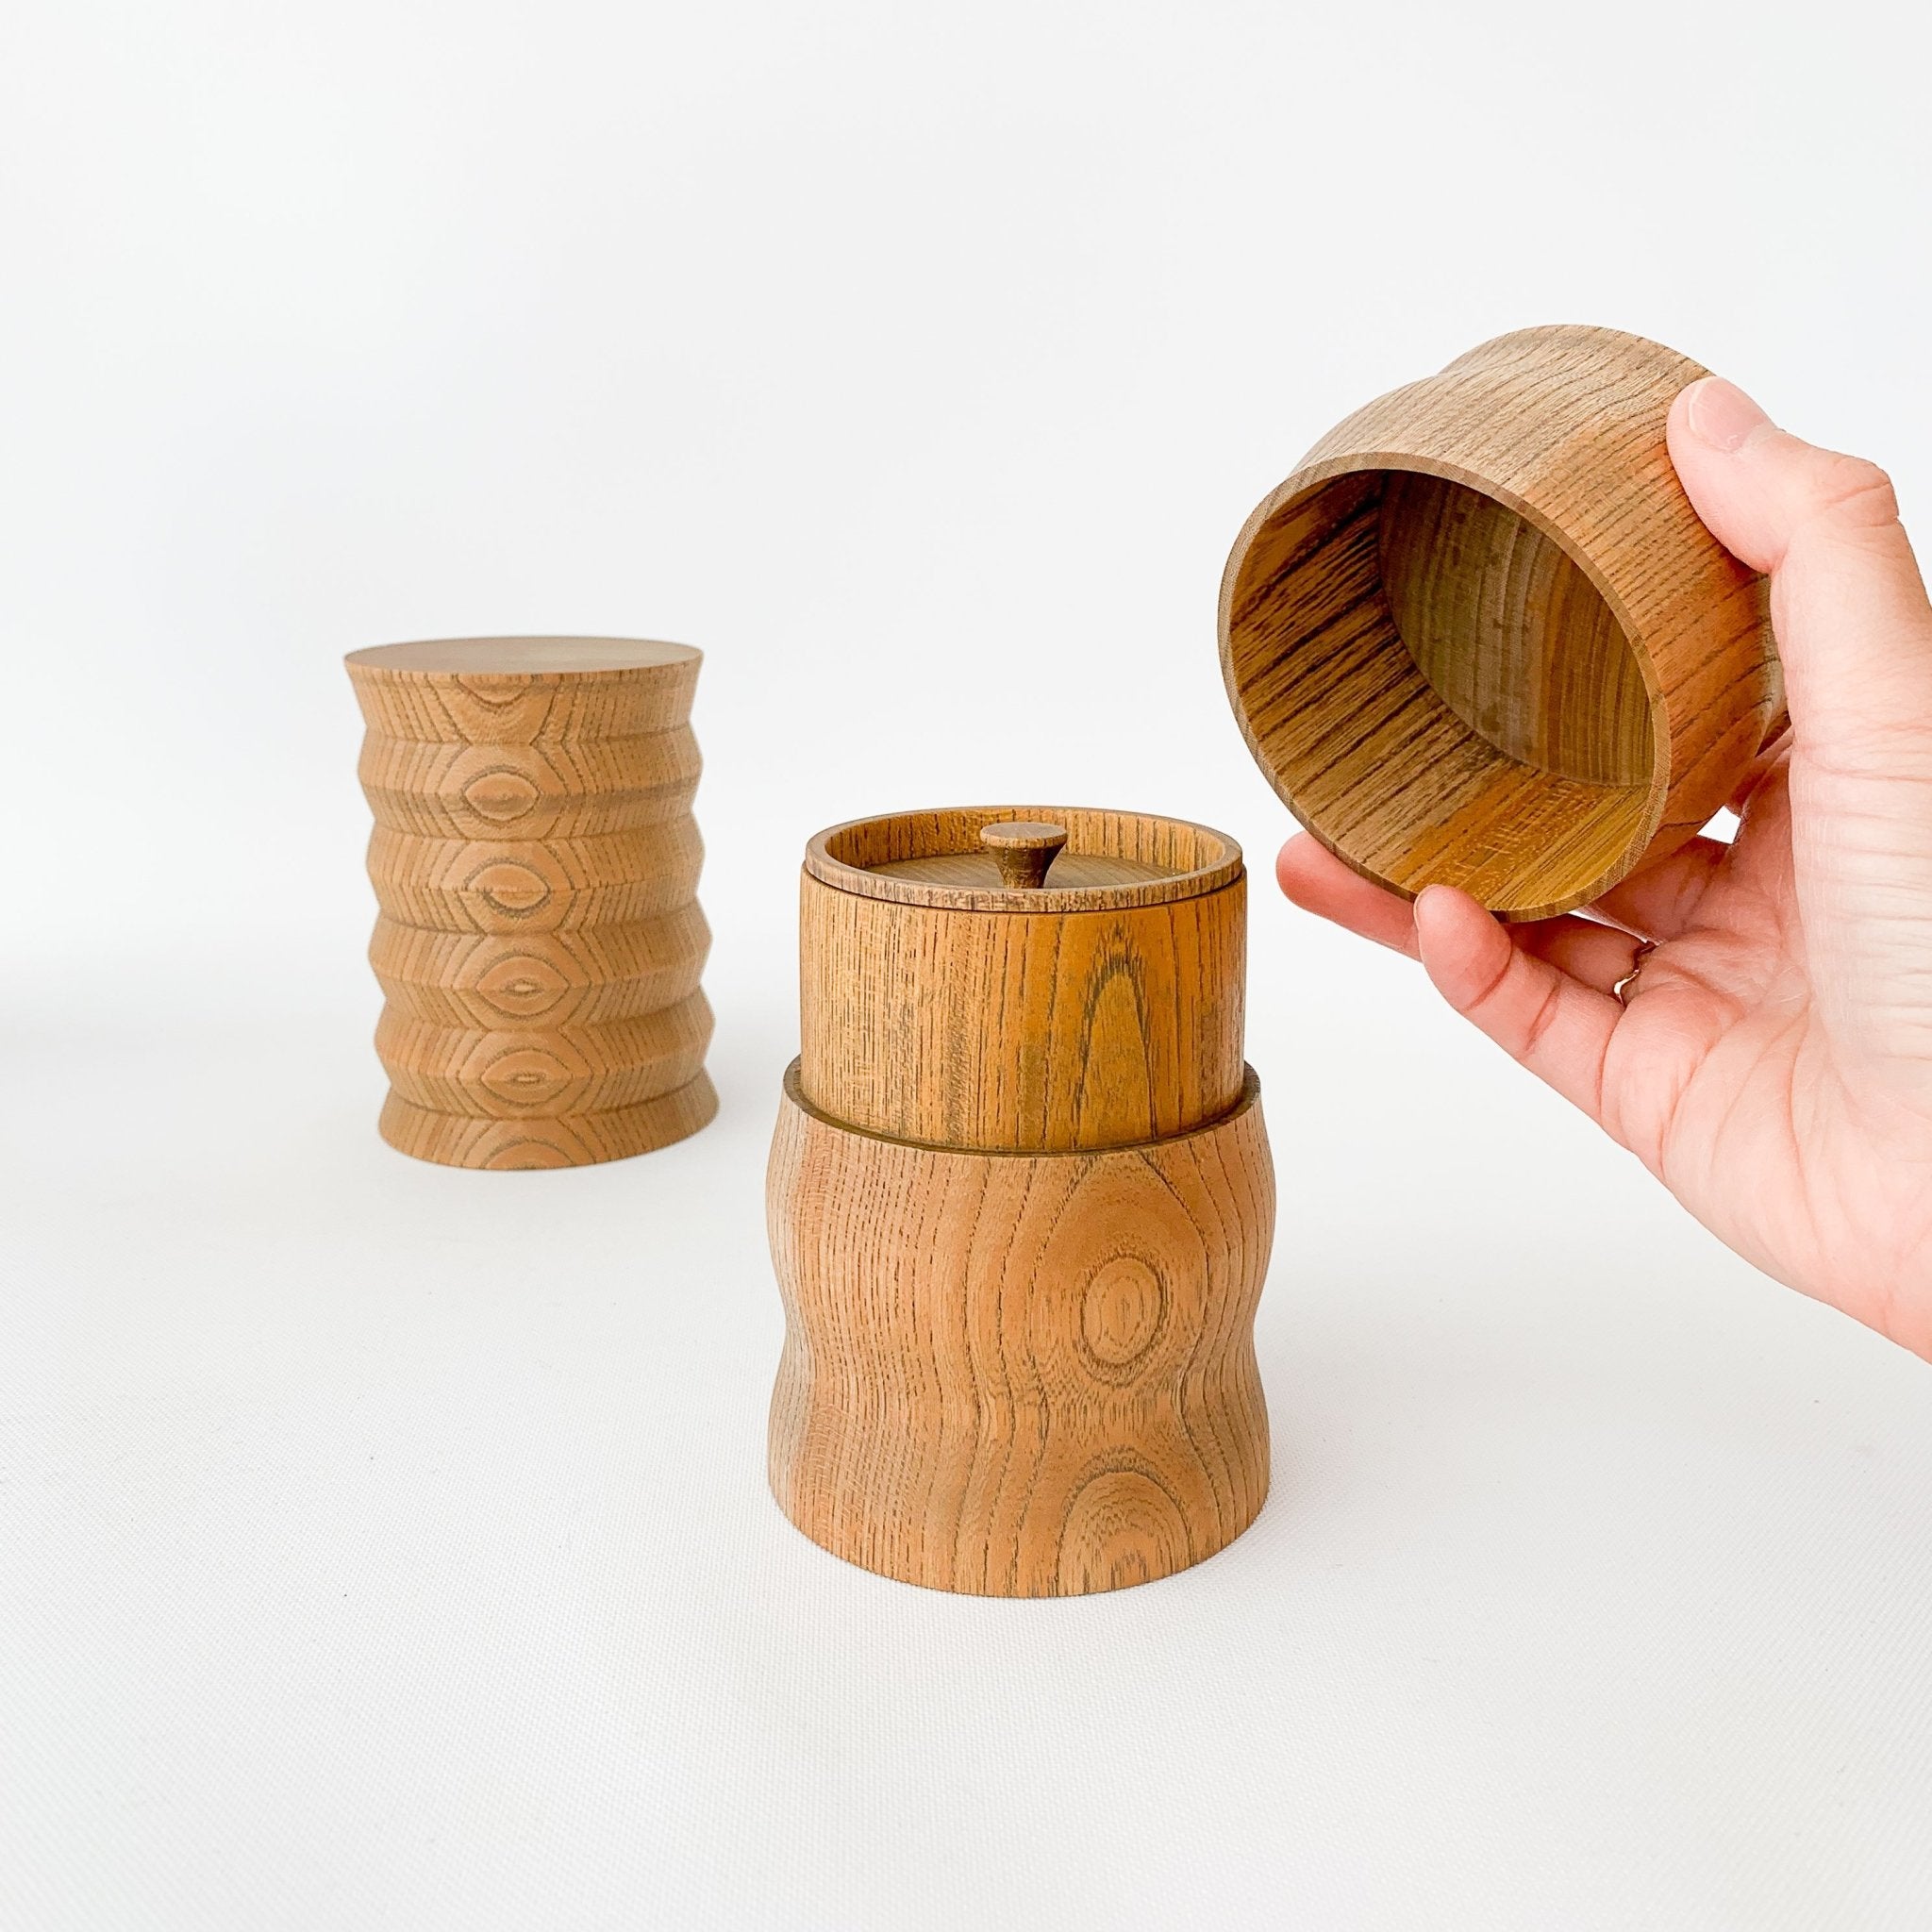 Kisen Tea Containers by Gato - tortoise general store